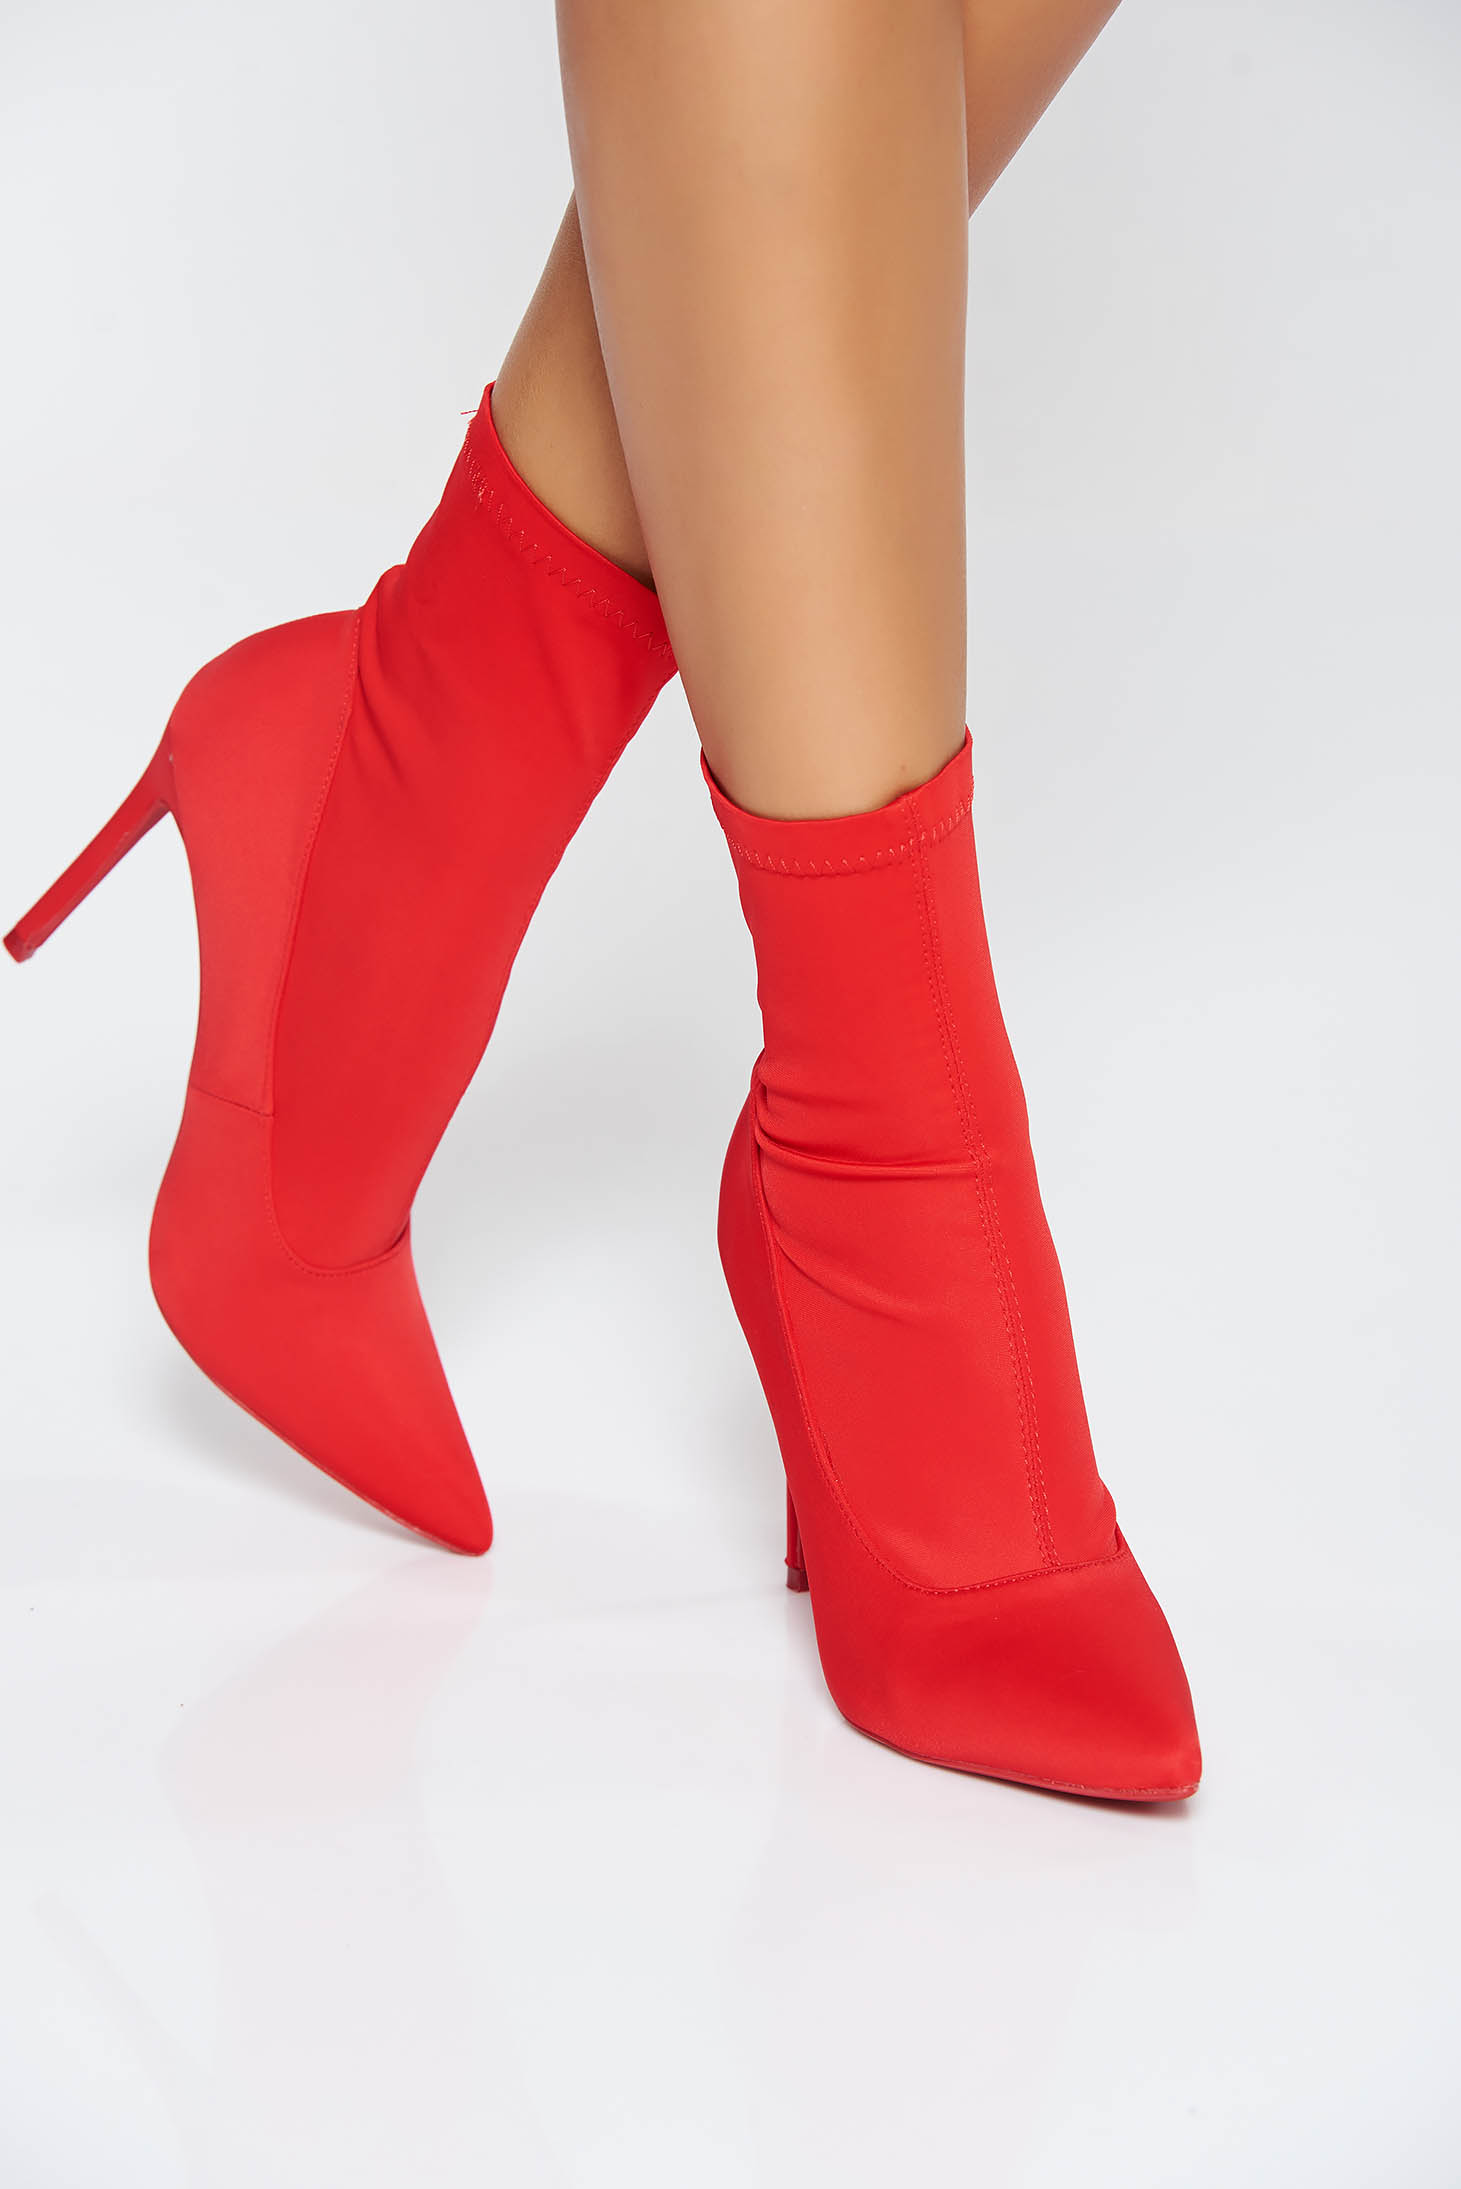 red satin boots